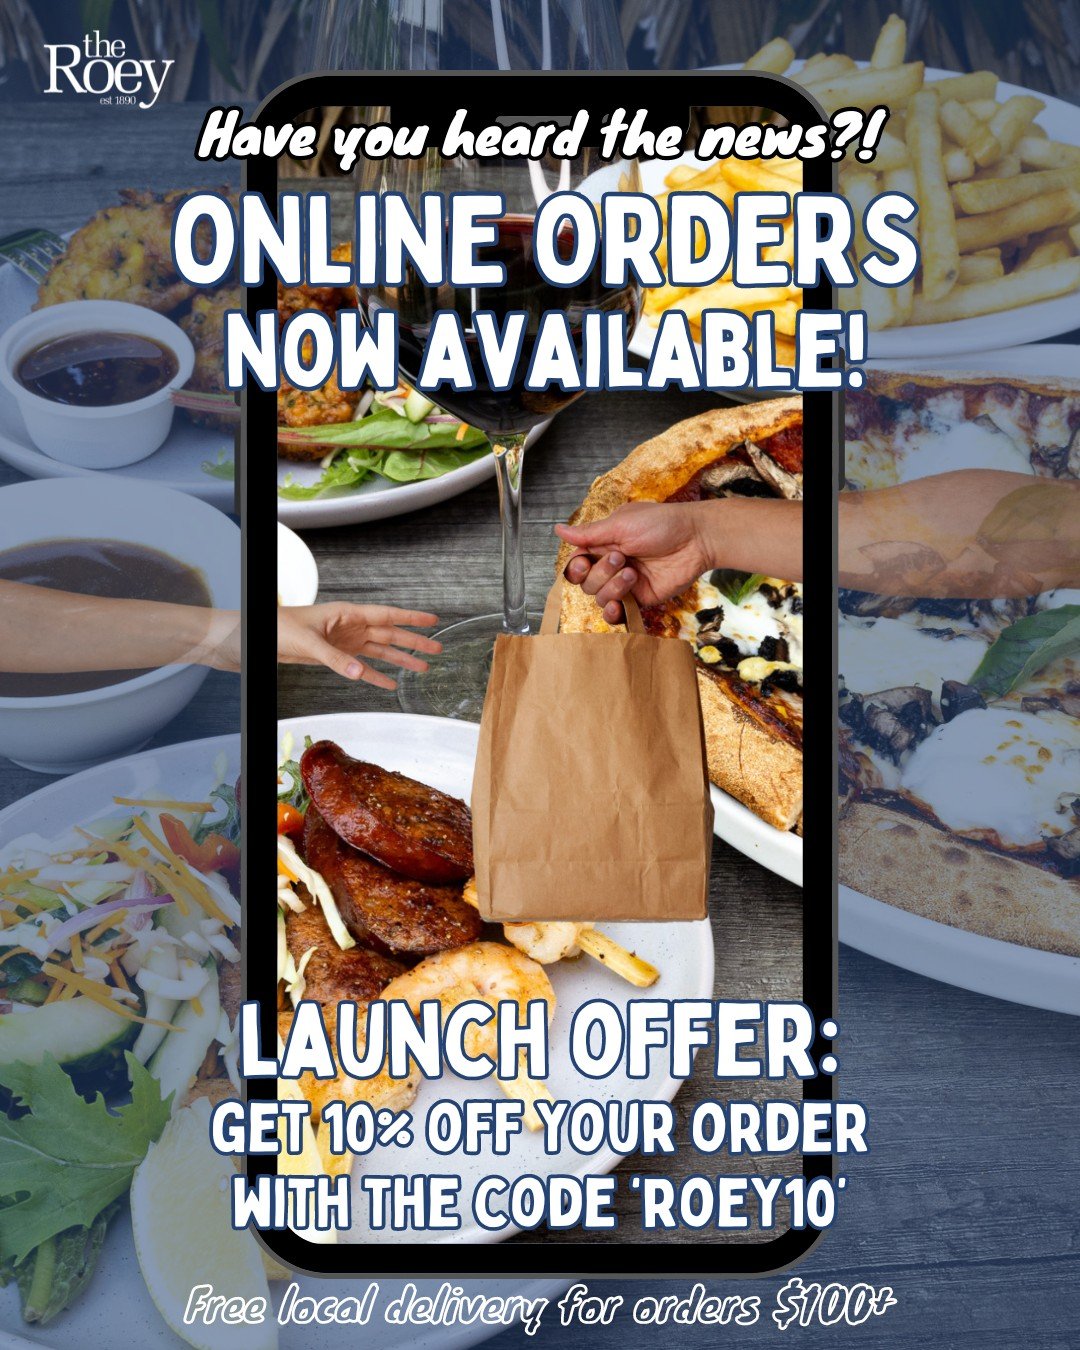 Here's some GREAT news for your FRIDAY!

You can now order your fave Roey meals ONLINE, straight from your phone/device/laptop! How handy is that?

And as an weekend launch offer we are giving your 10% OFF your order this weekend.

To place your orde